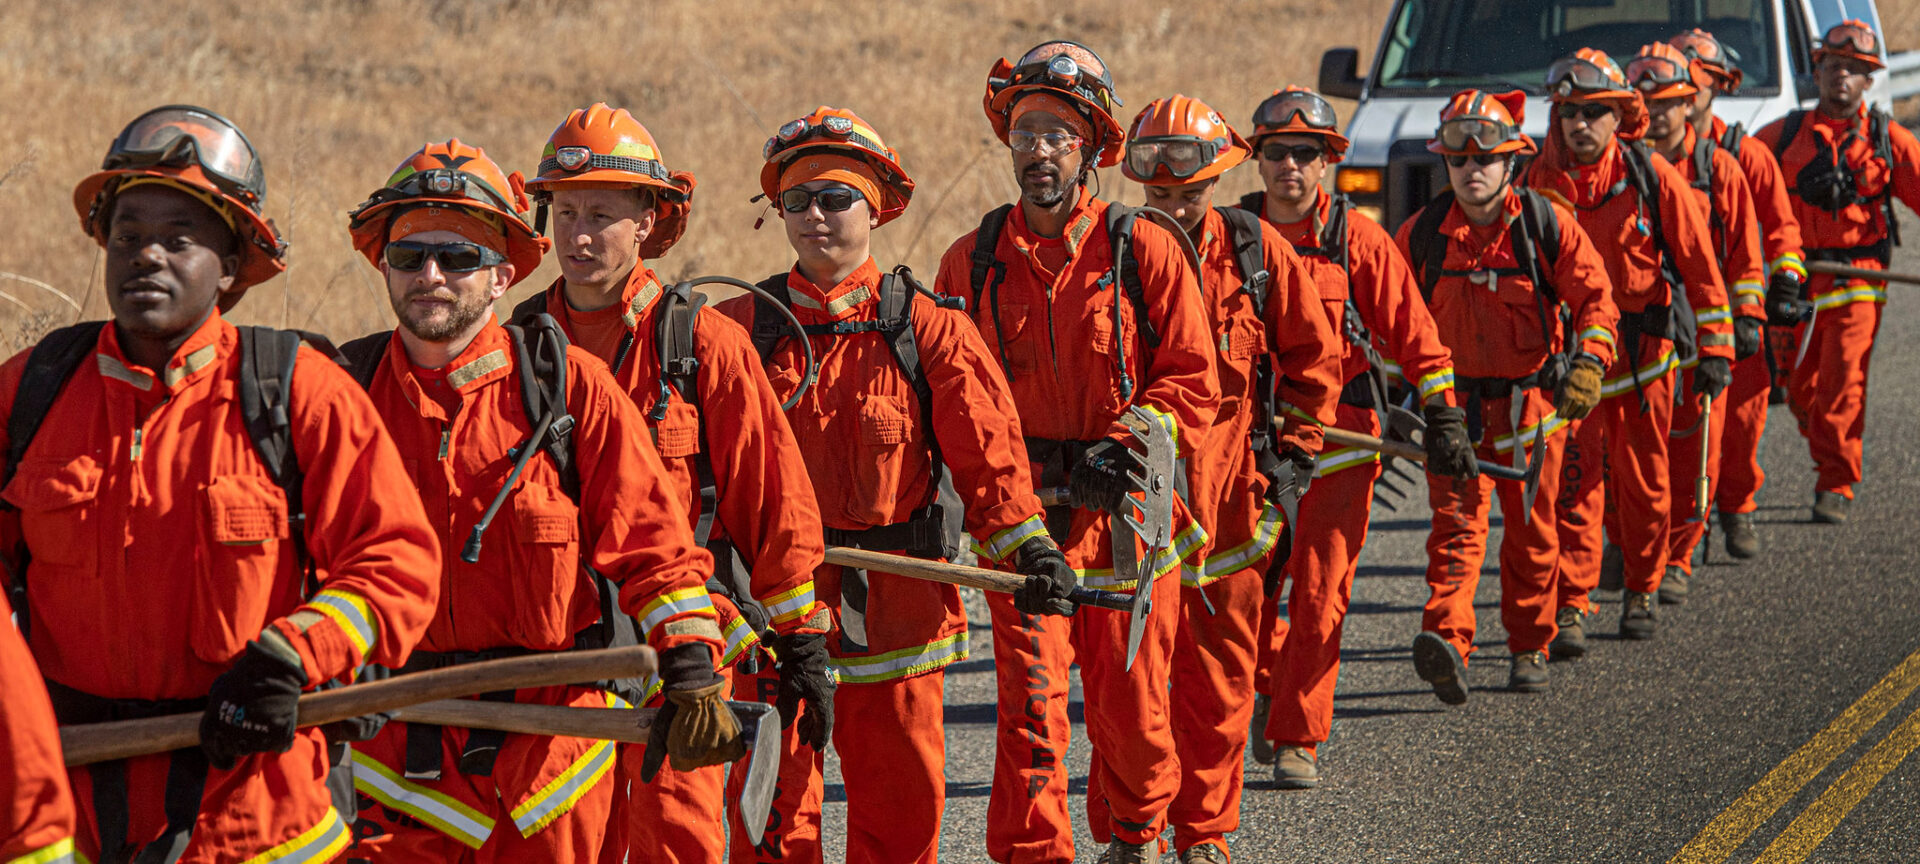 Inmates at work during a controlled burn at Eastman Lake in Madera County, California, in May 2021. (Cal Fire)